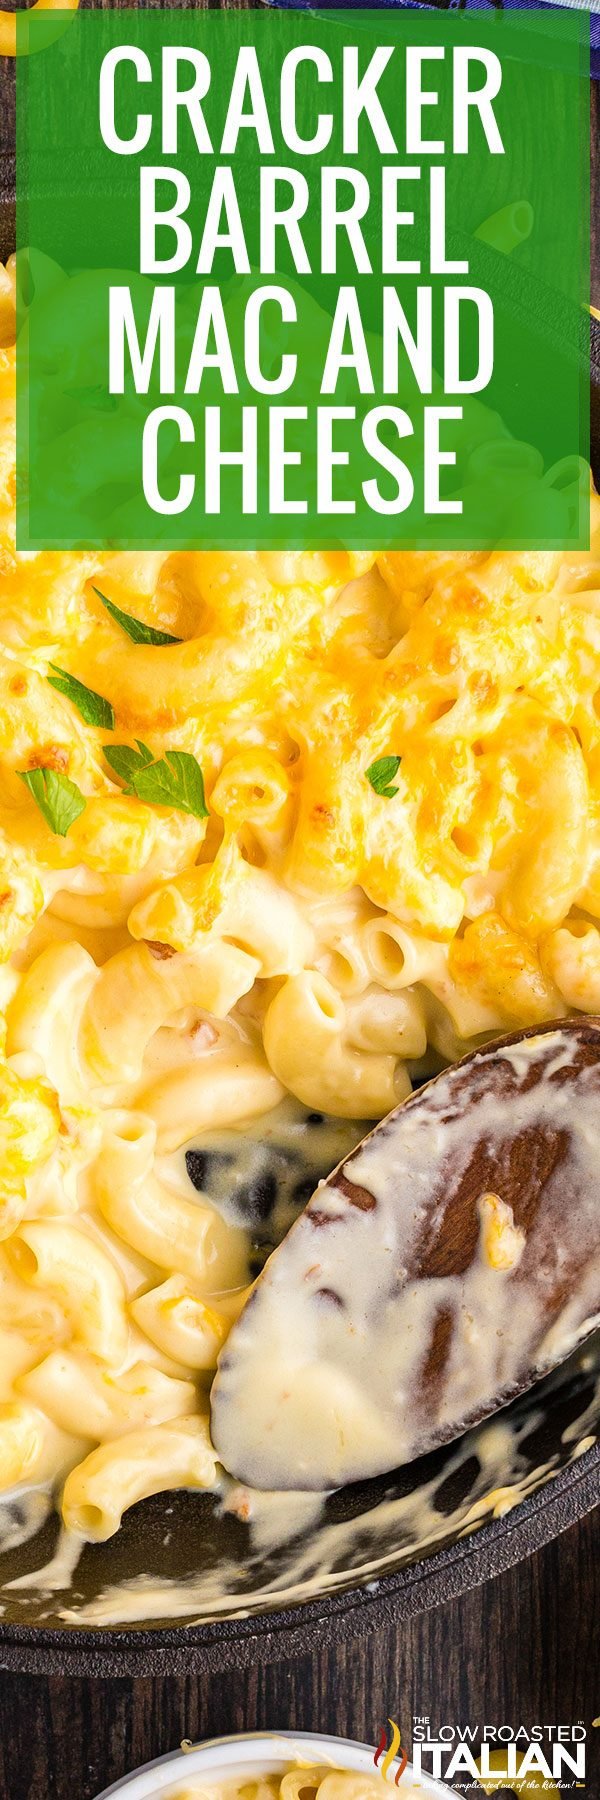 titled collage for Cracker Barrel mac and cheese recipe